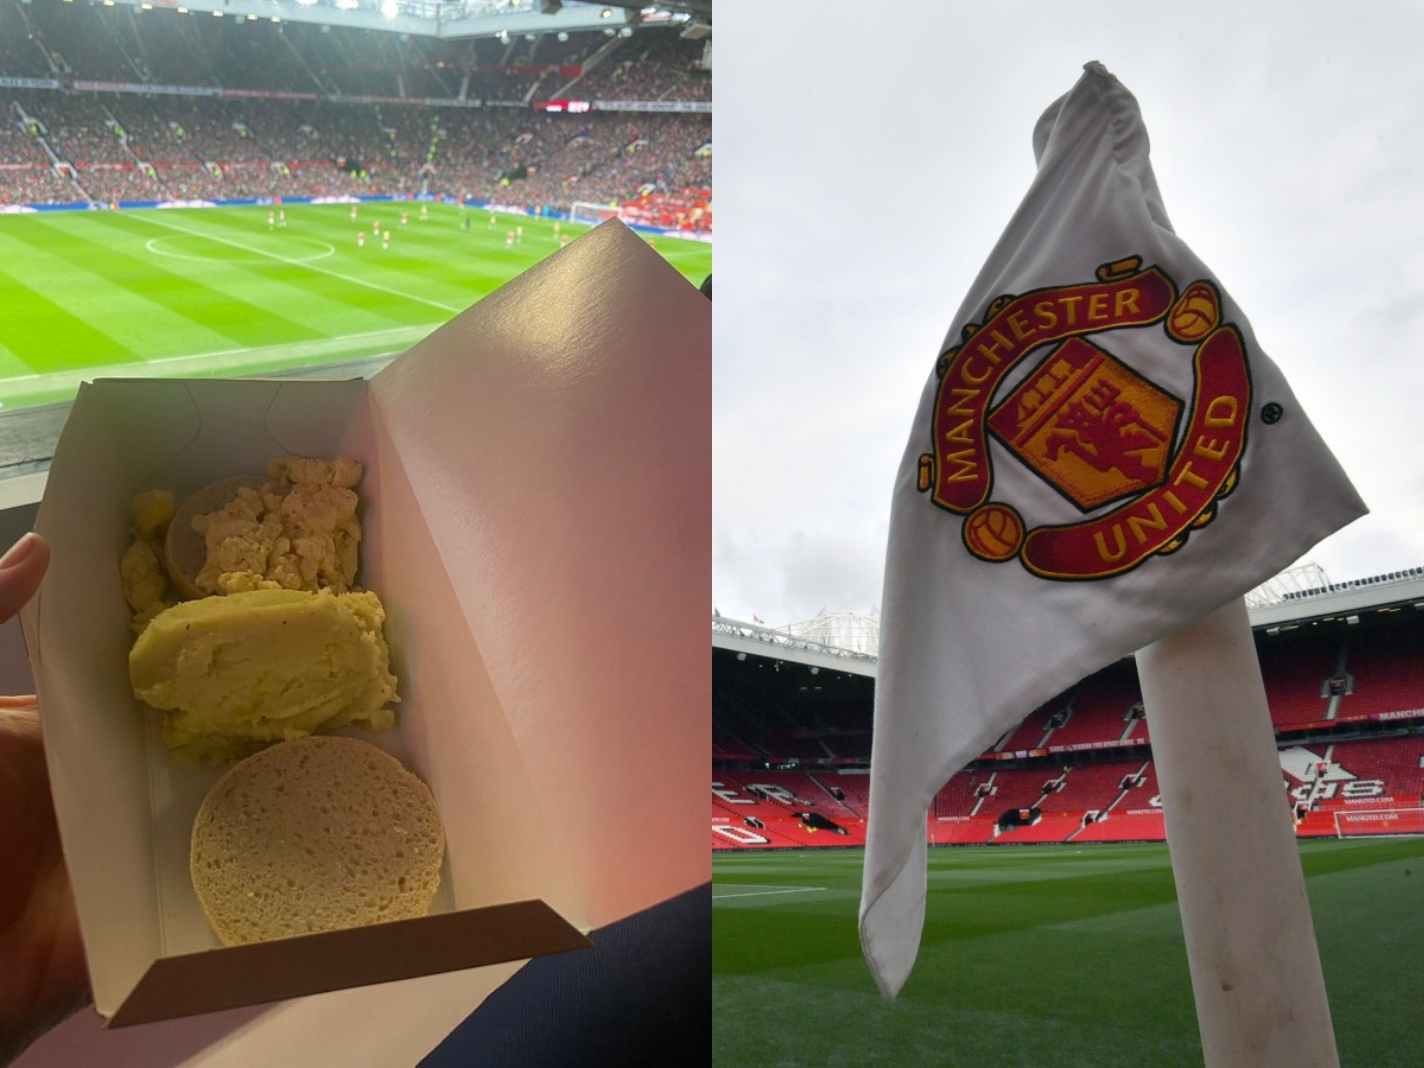 BT Sport presenter Jake Humphrey complained about bland food at Old Trafford